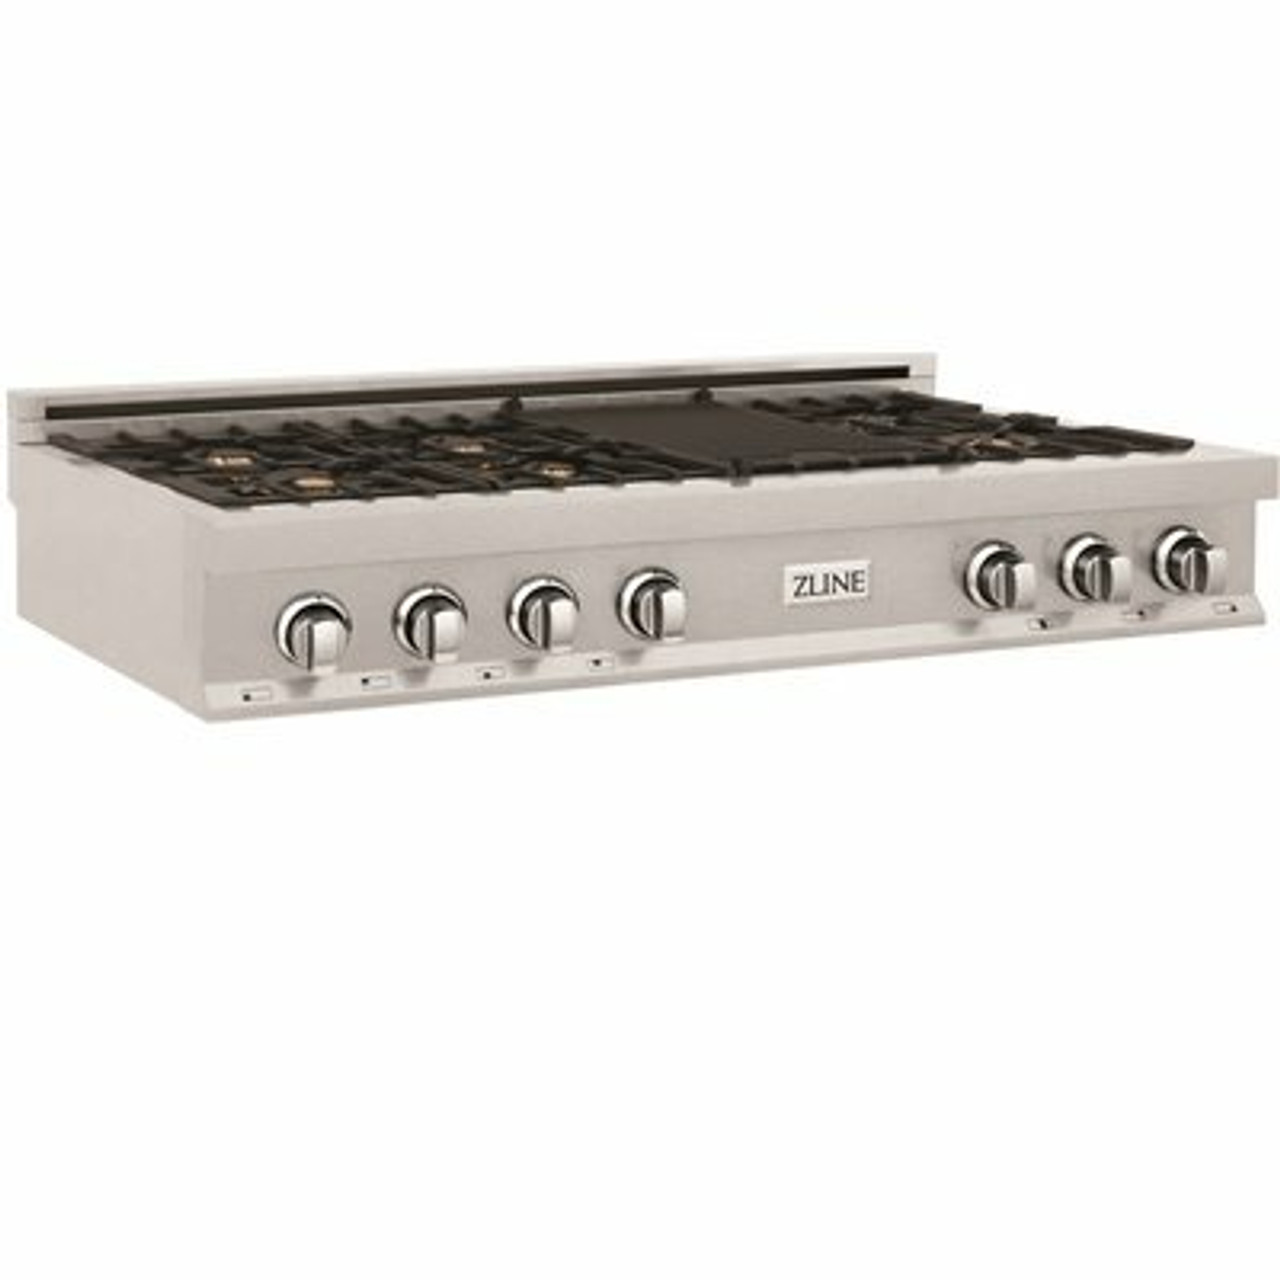 Zline Kitchen And Bath Zline 48 In. Porcelain Gas Stovetop In Durasnow Stainless Steel With 7 Gas Brass Burners And Griddle